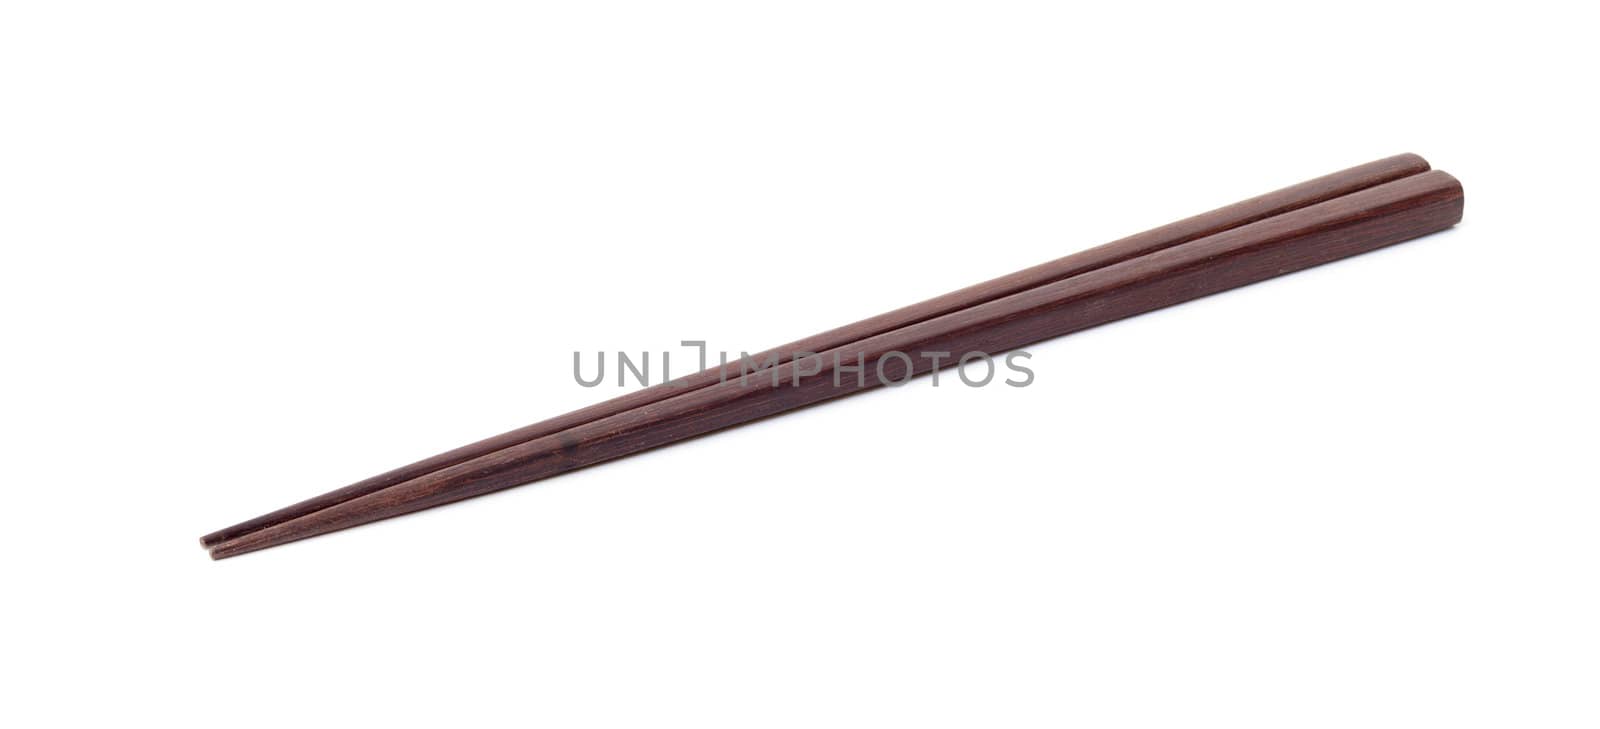 Two Brown Chopsticks, isolated on white background